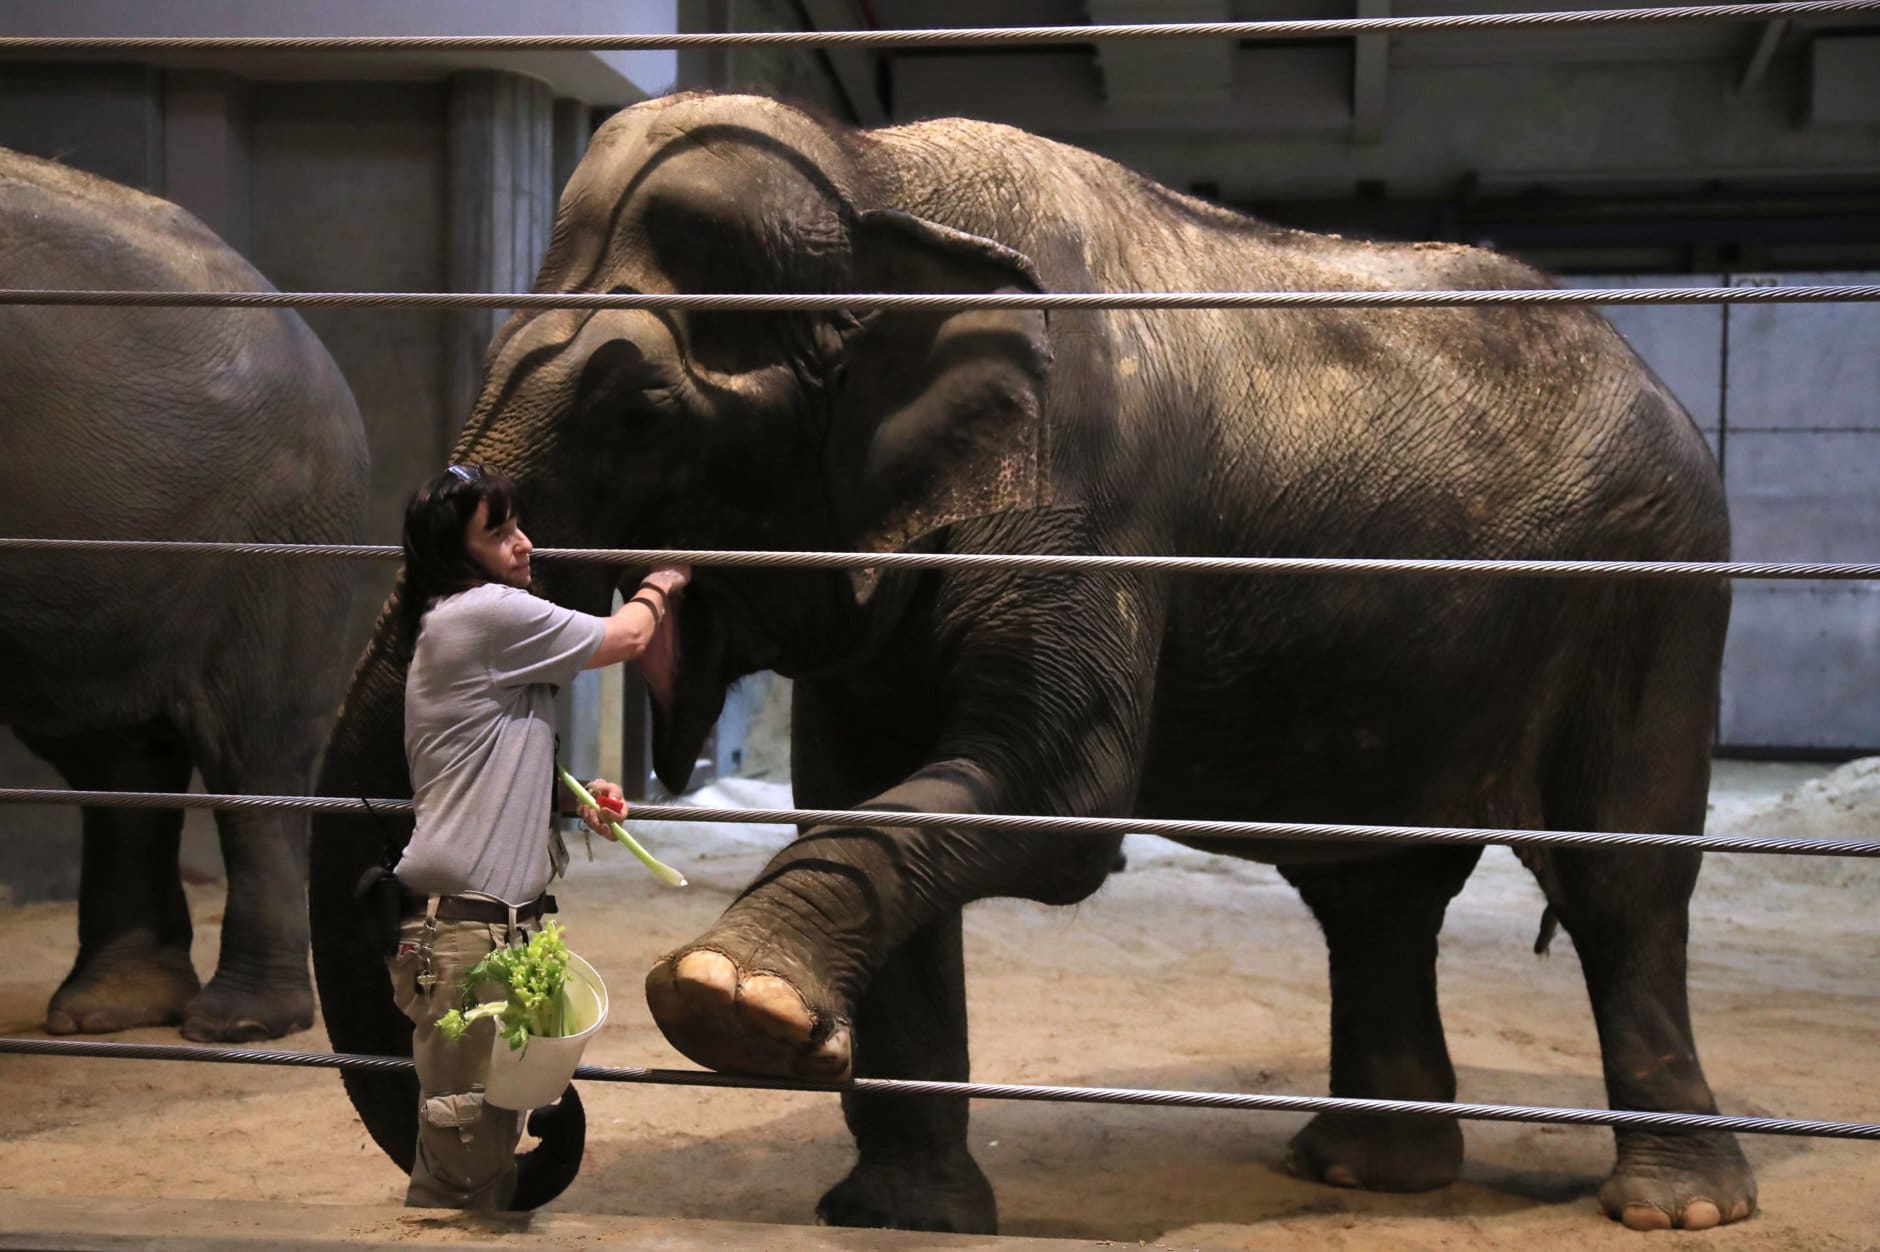 Elephant manager Marie Galloway feeds 70-year-old Asian elephant Ambika at the Smithsonian's National Zoo in Washington, Monday, Dec. 31, 2018. In the event of a prolonged government shutdown and zoo closes, the zoo keepers will be working unpaid. (AP Photo/Manuel Balce Ceneta)